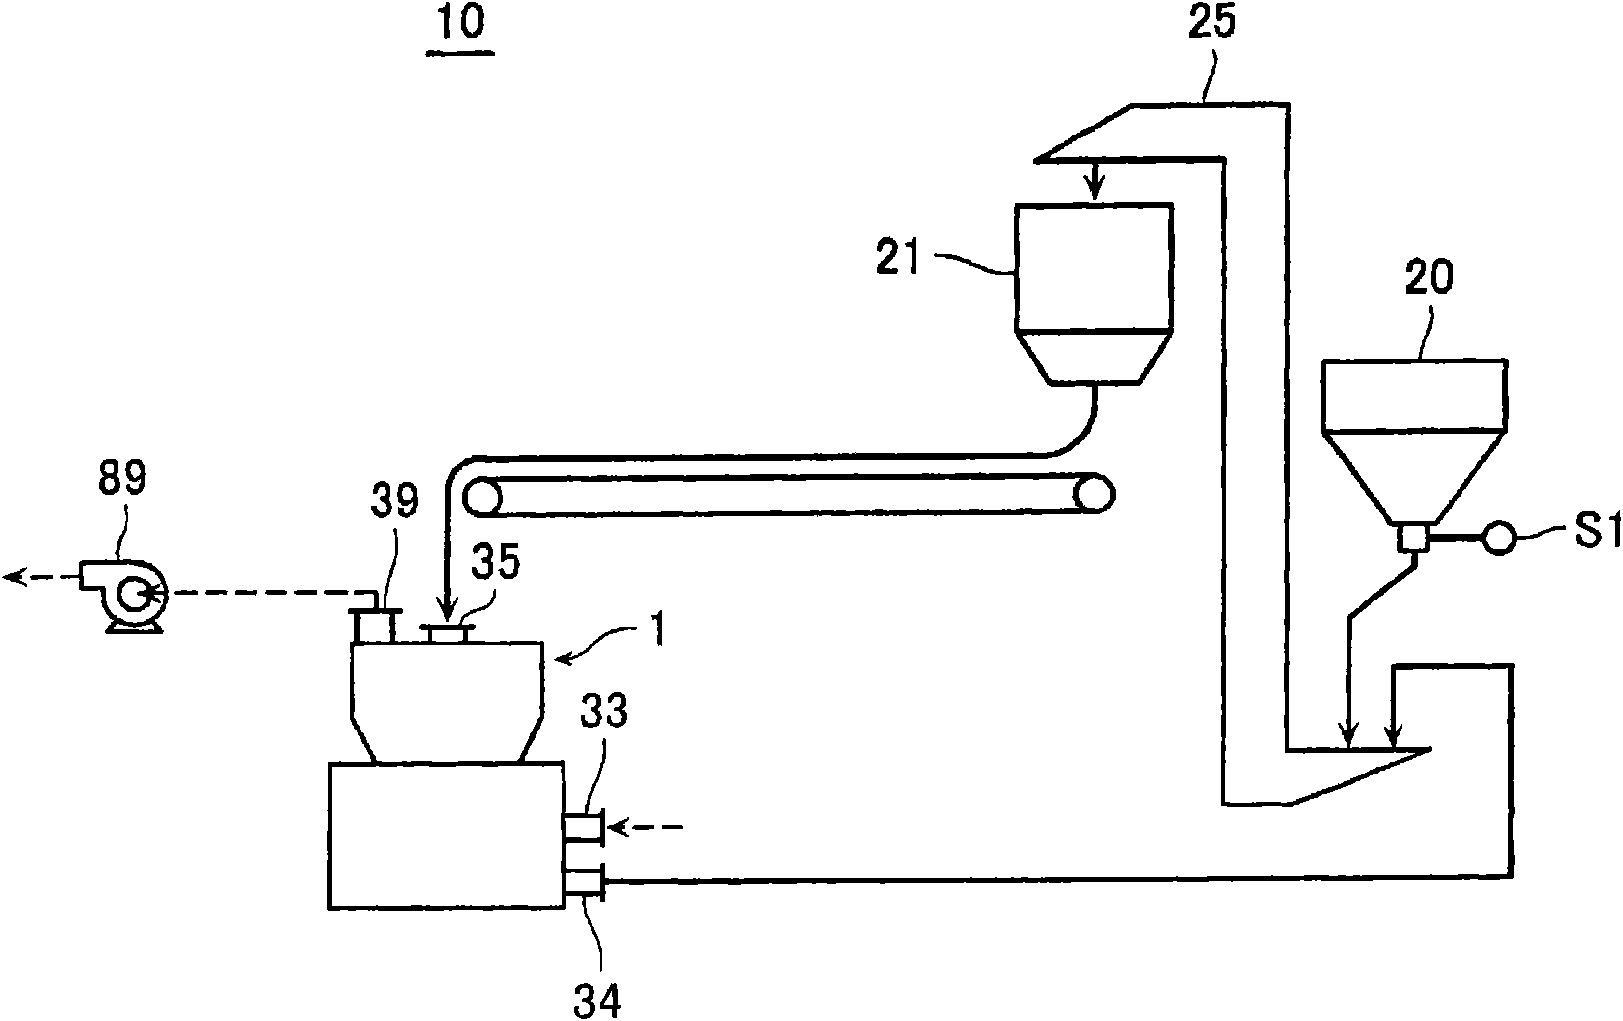 Control method and controller of vertical crusher